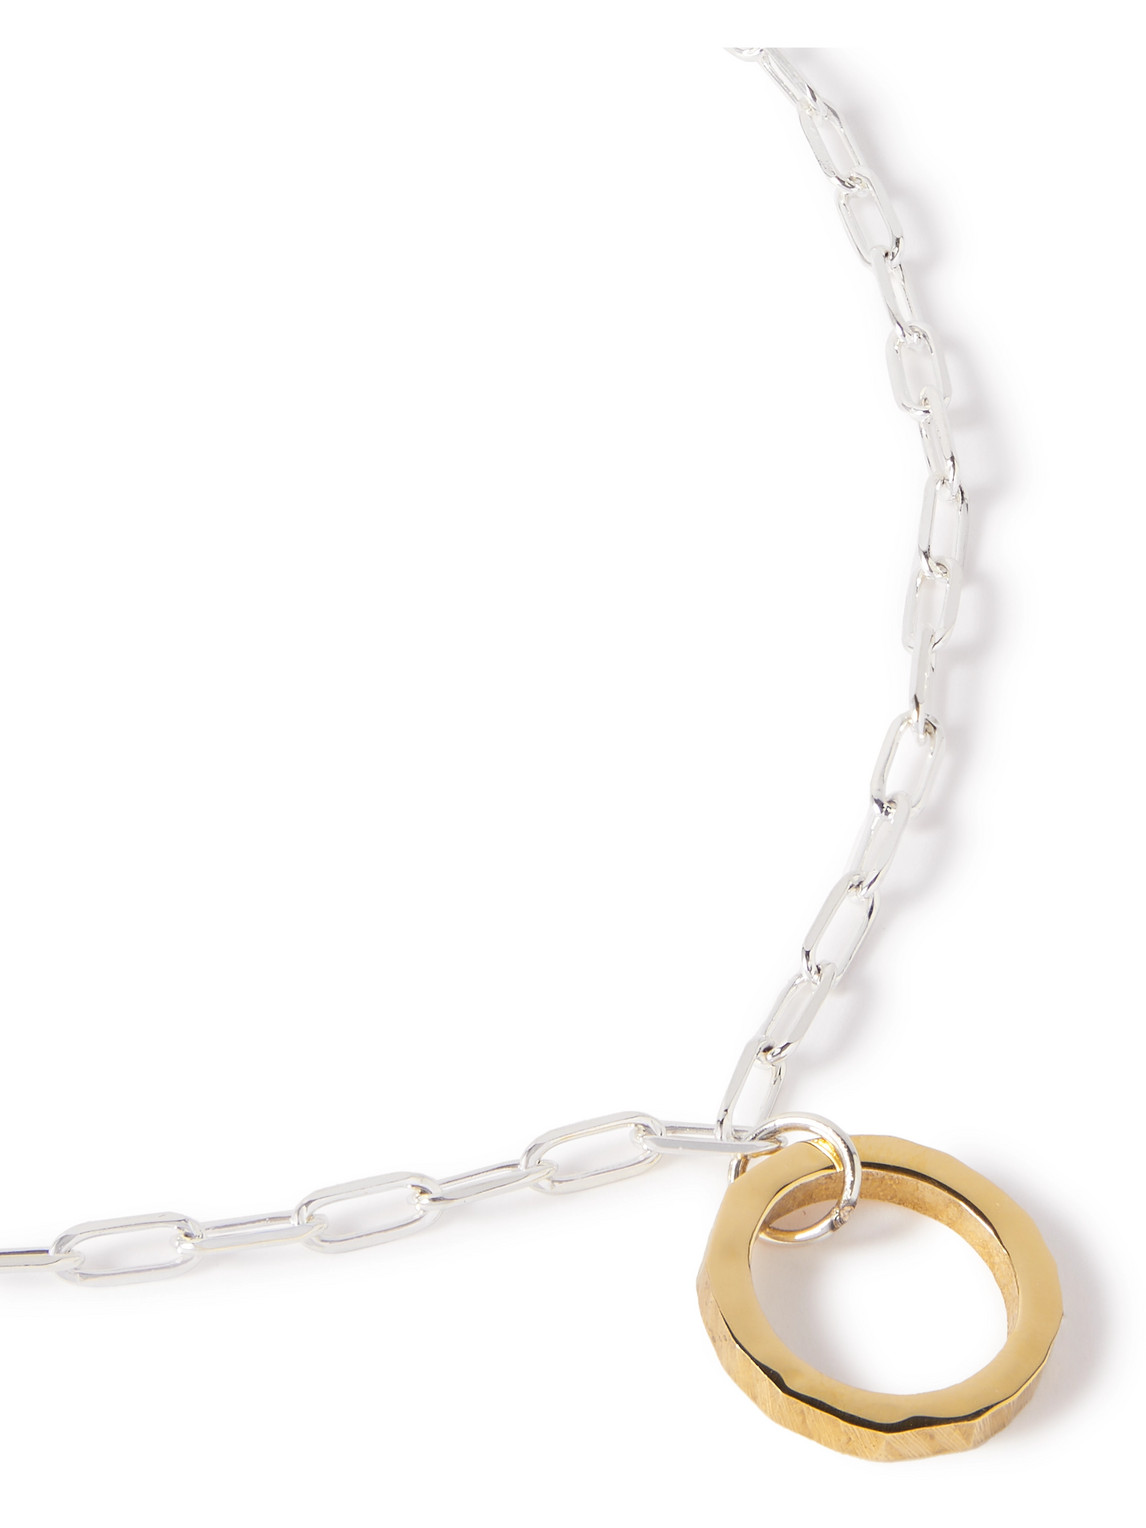 Rae Sterling Silver and Gold-Plated Pendant Necklace